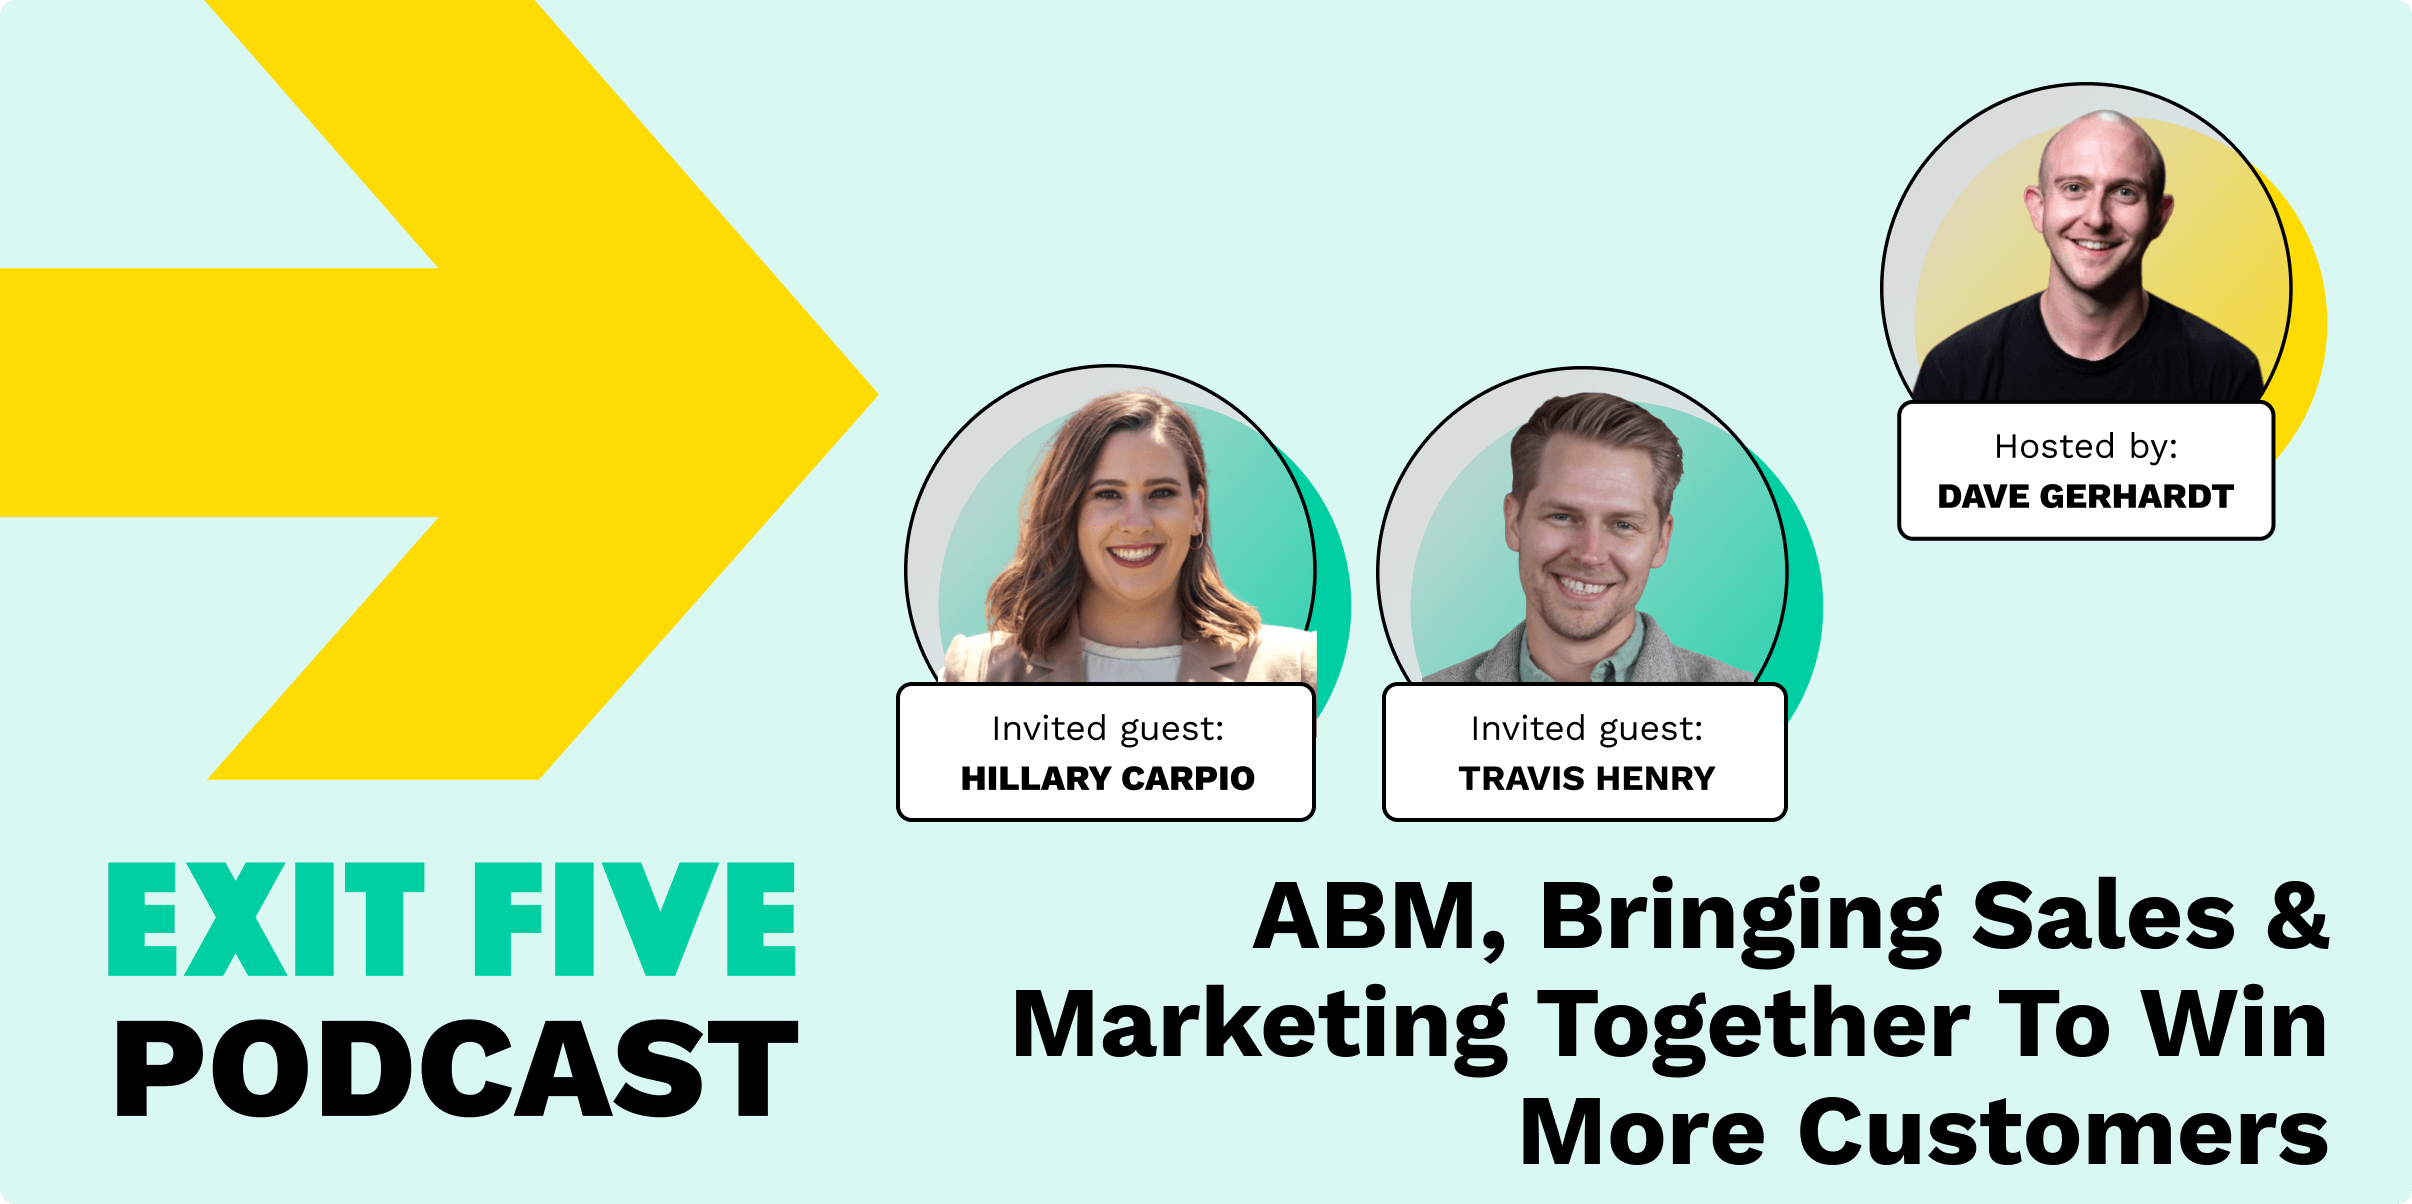 #88: ABM, Bringing Sales & Marketing Together To Win More Customers, Busting Silos with Hillary Carpio & Travis Henry from Snowflake